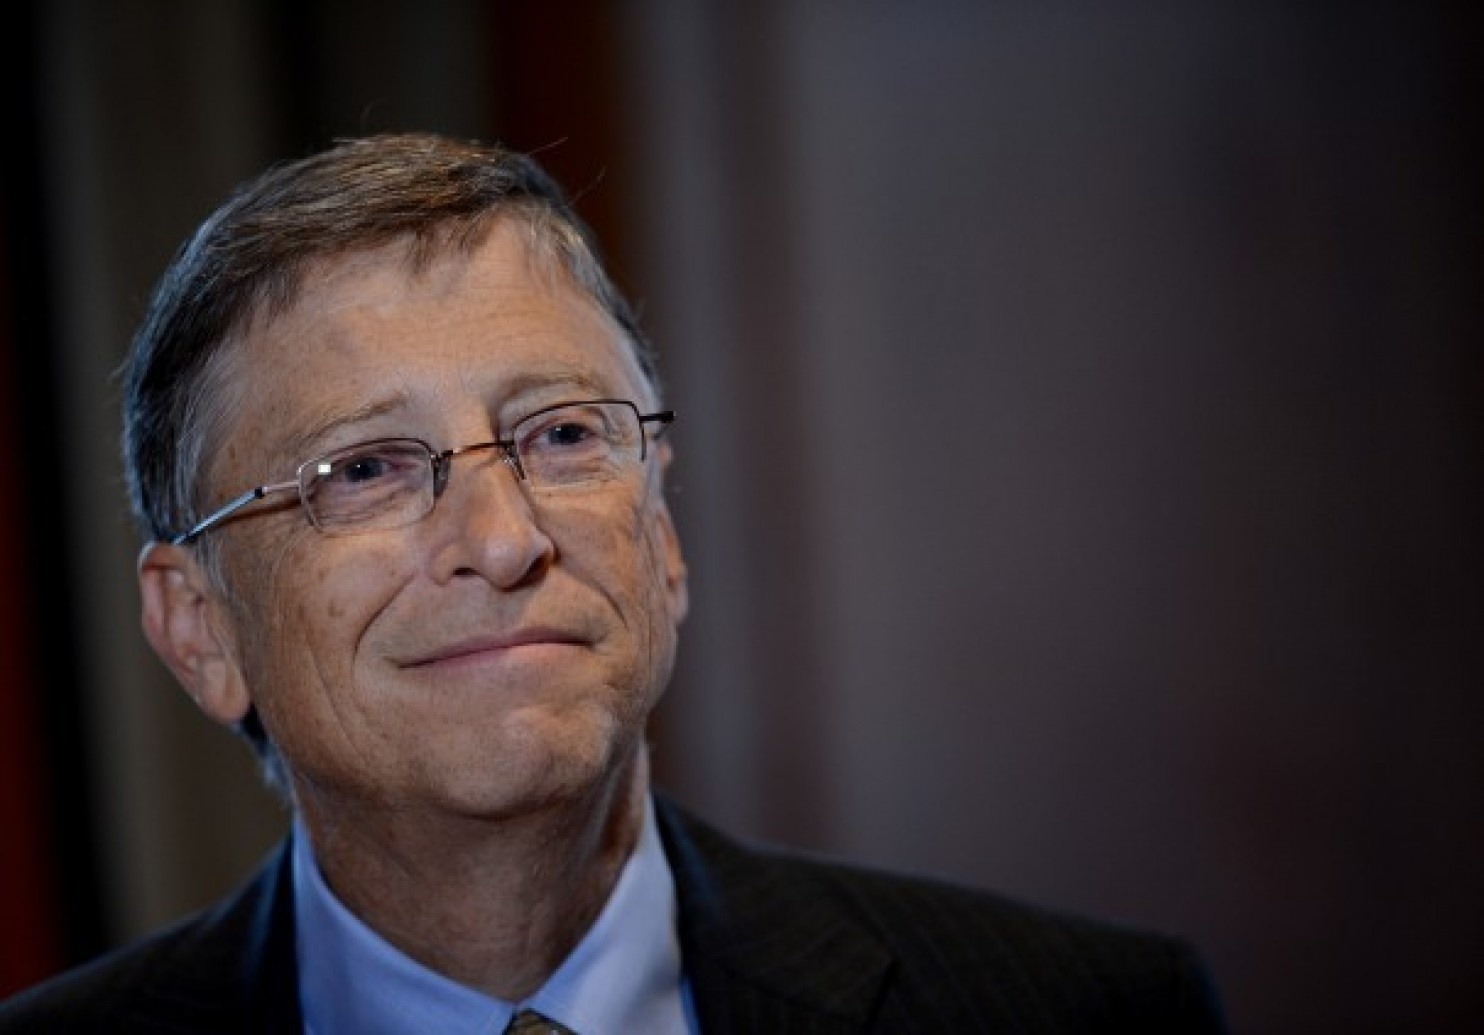 Bill Gates can’t go to sleep without reading in bed for a while.